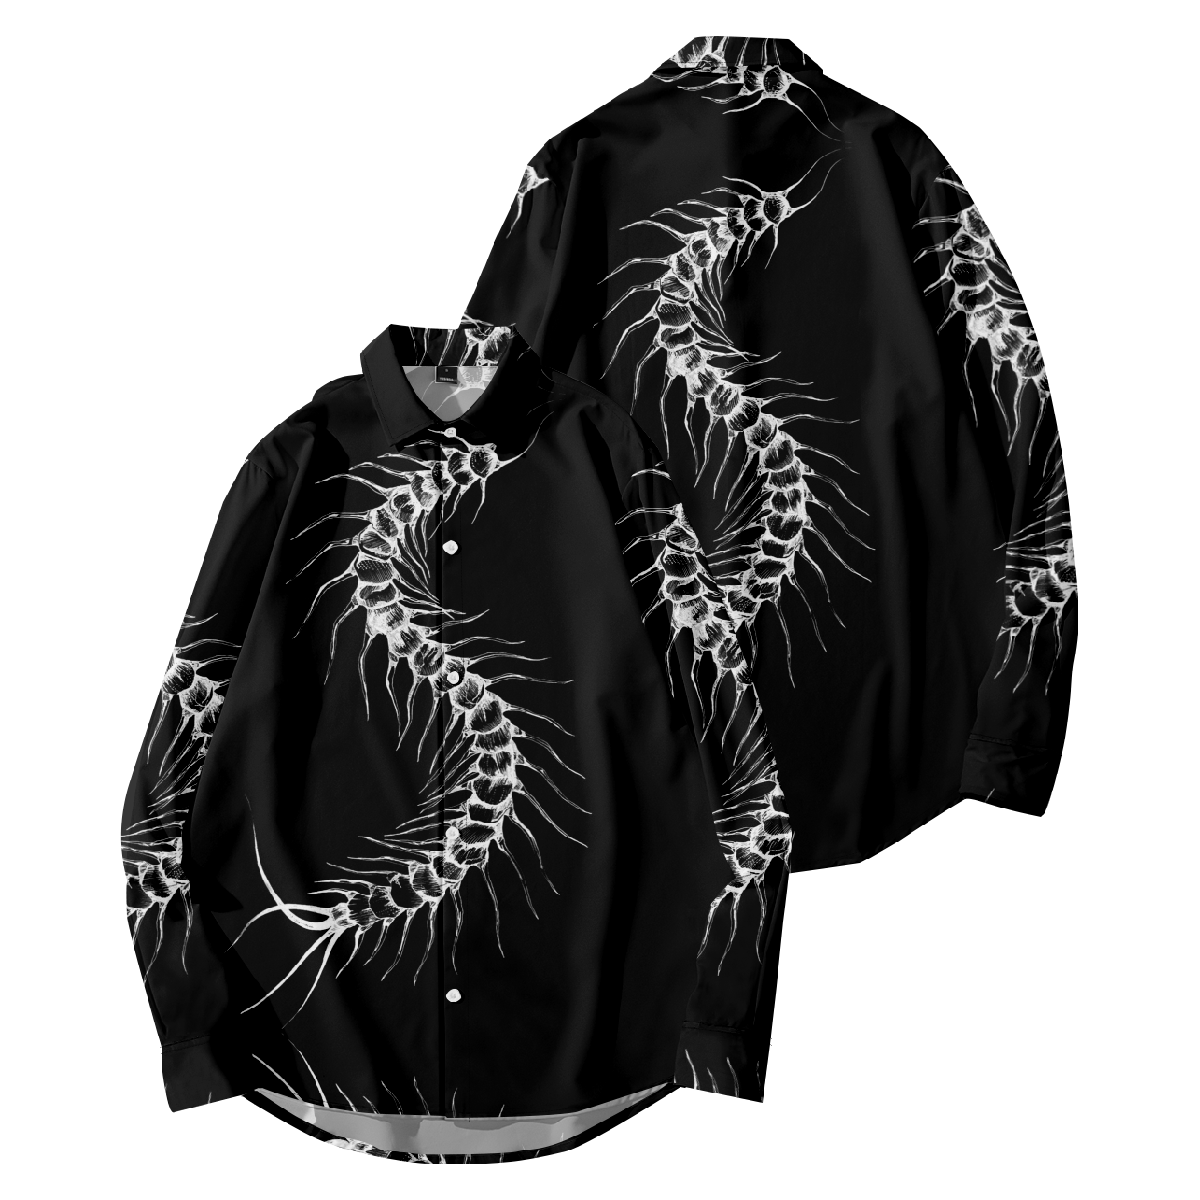 Centipedes Skeleton Print Button Up Shirt Long Sleeve Shirt for Men Quick Dry Casual Tops